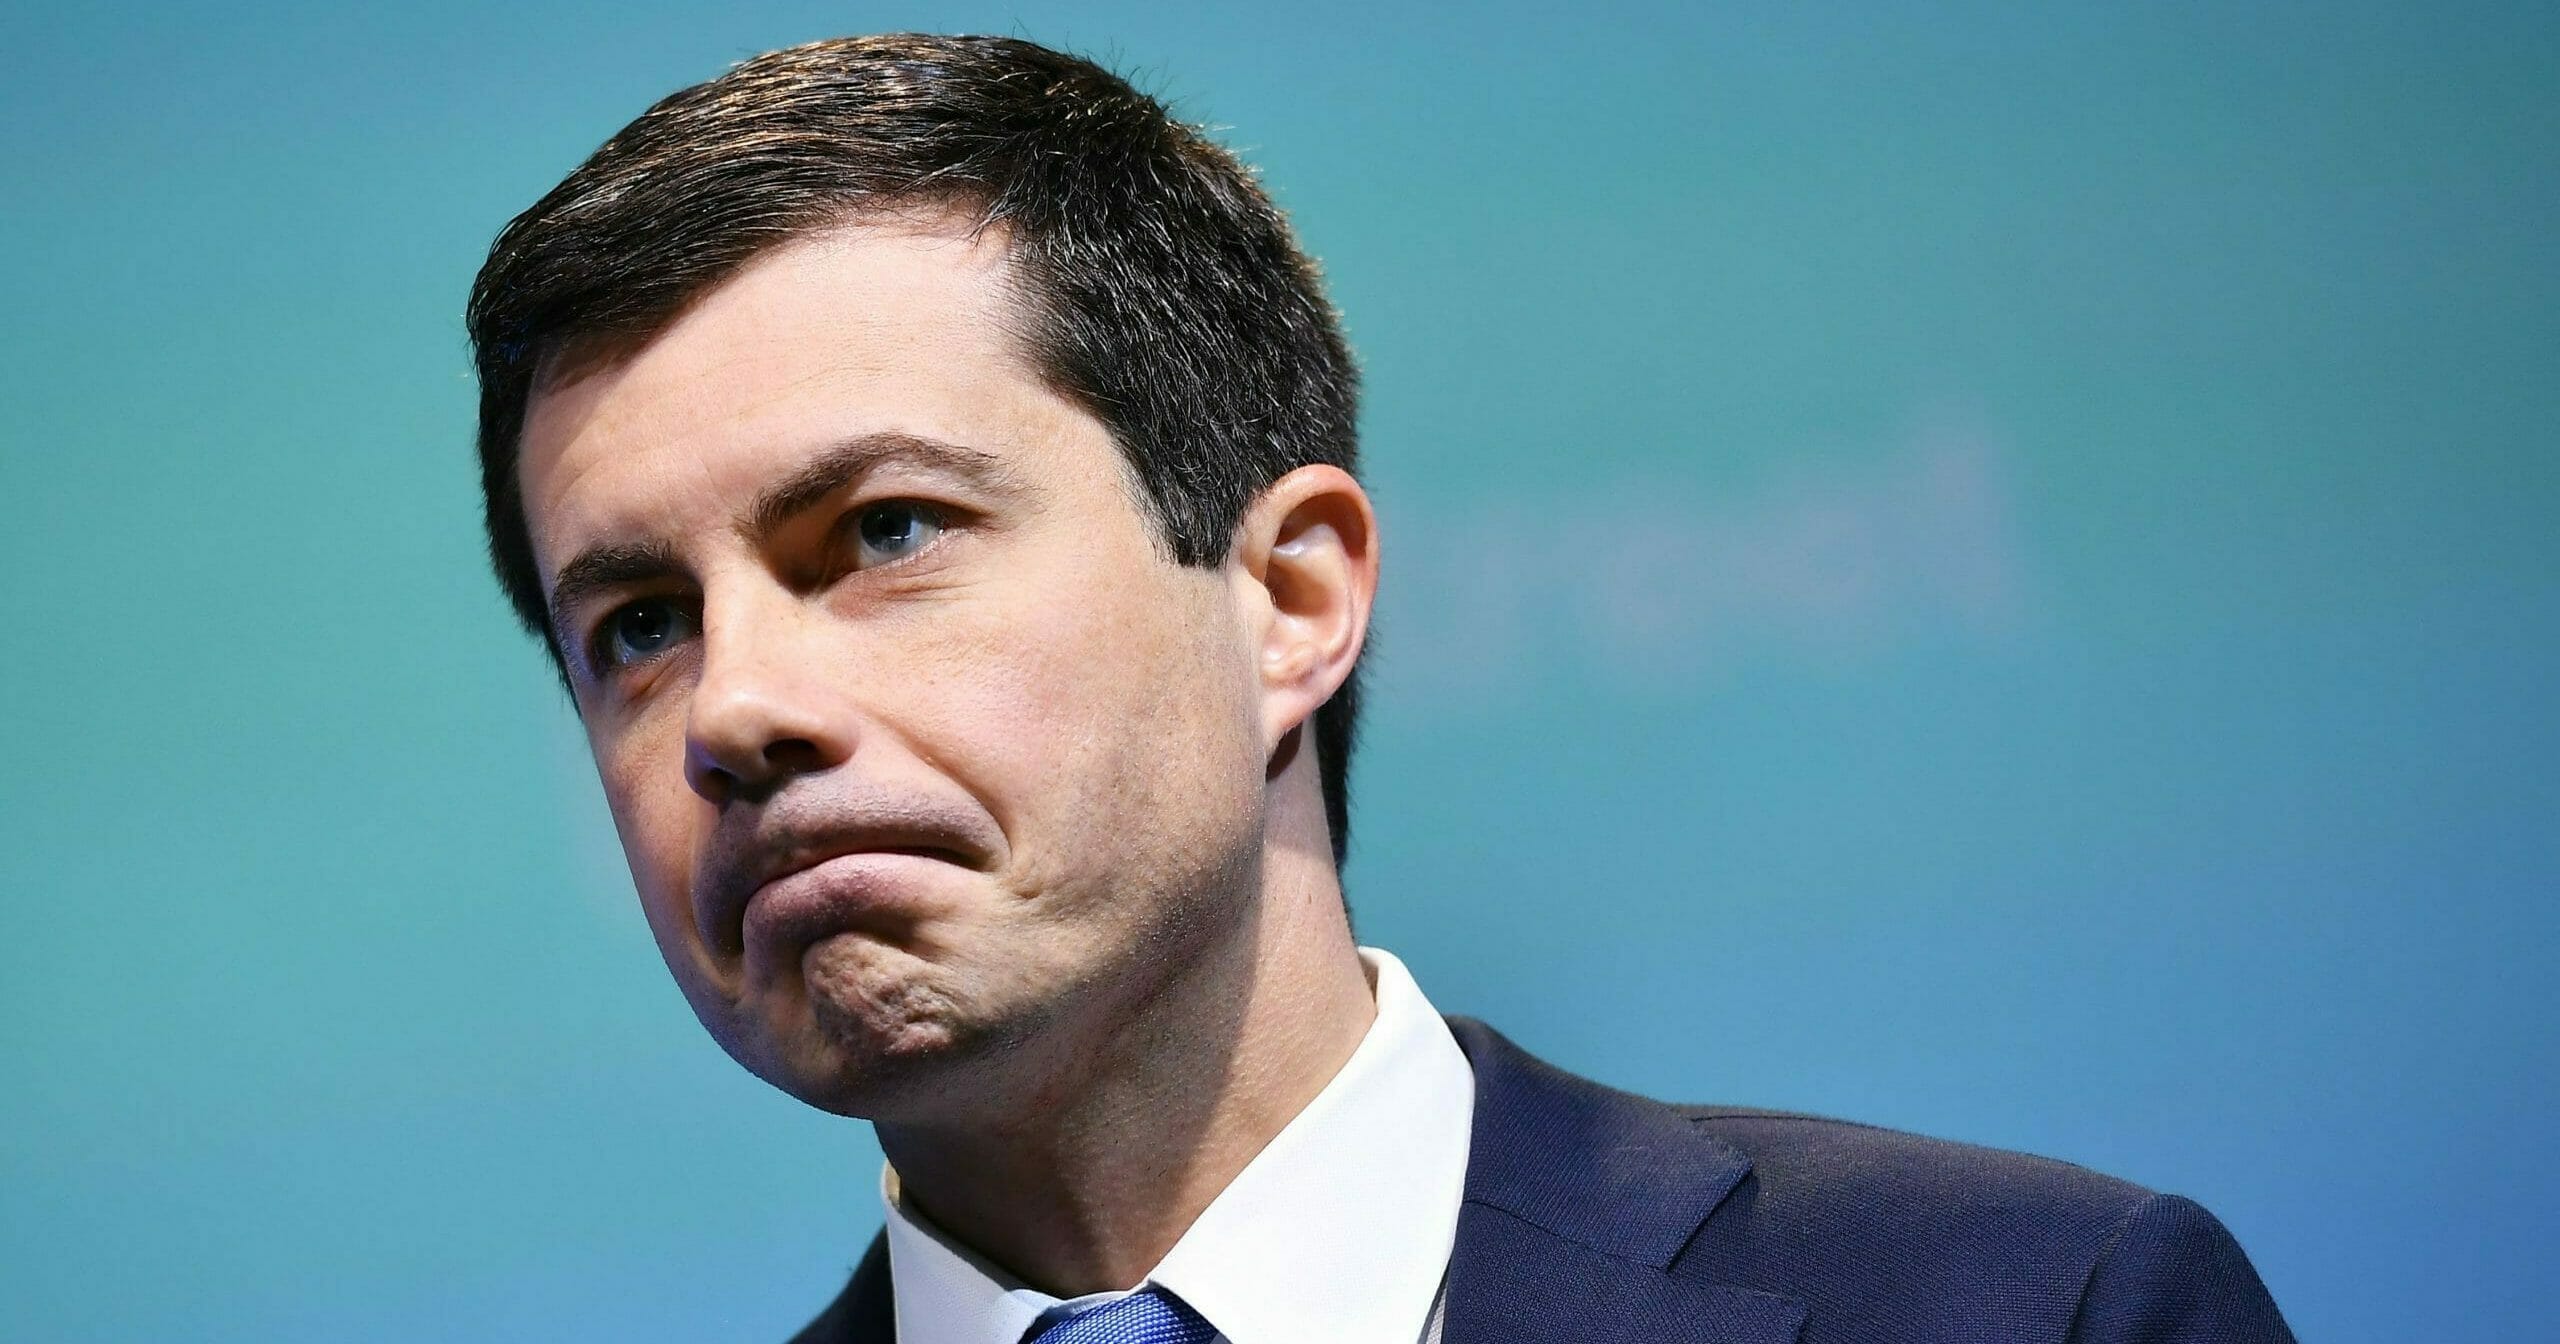 Then-South Bend, Indiana, Mayor Peter Buttigieg speaks during the 2019 J Street National Conference at the Walter E. Washington Convention Center in Washington, D.C., on Oct. 28, 2019.